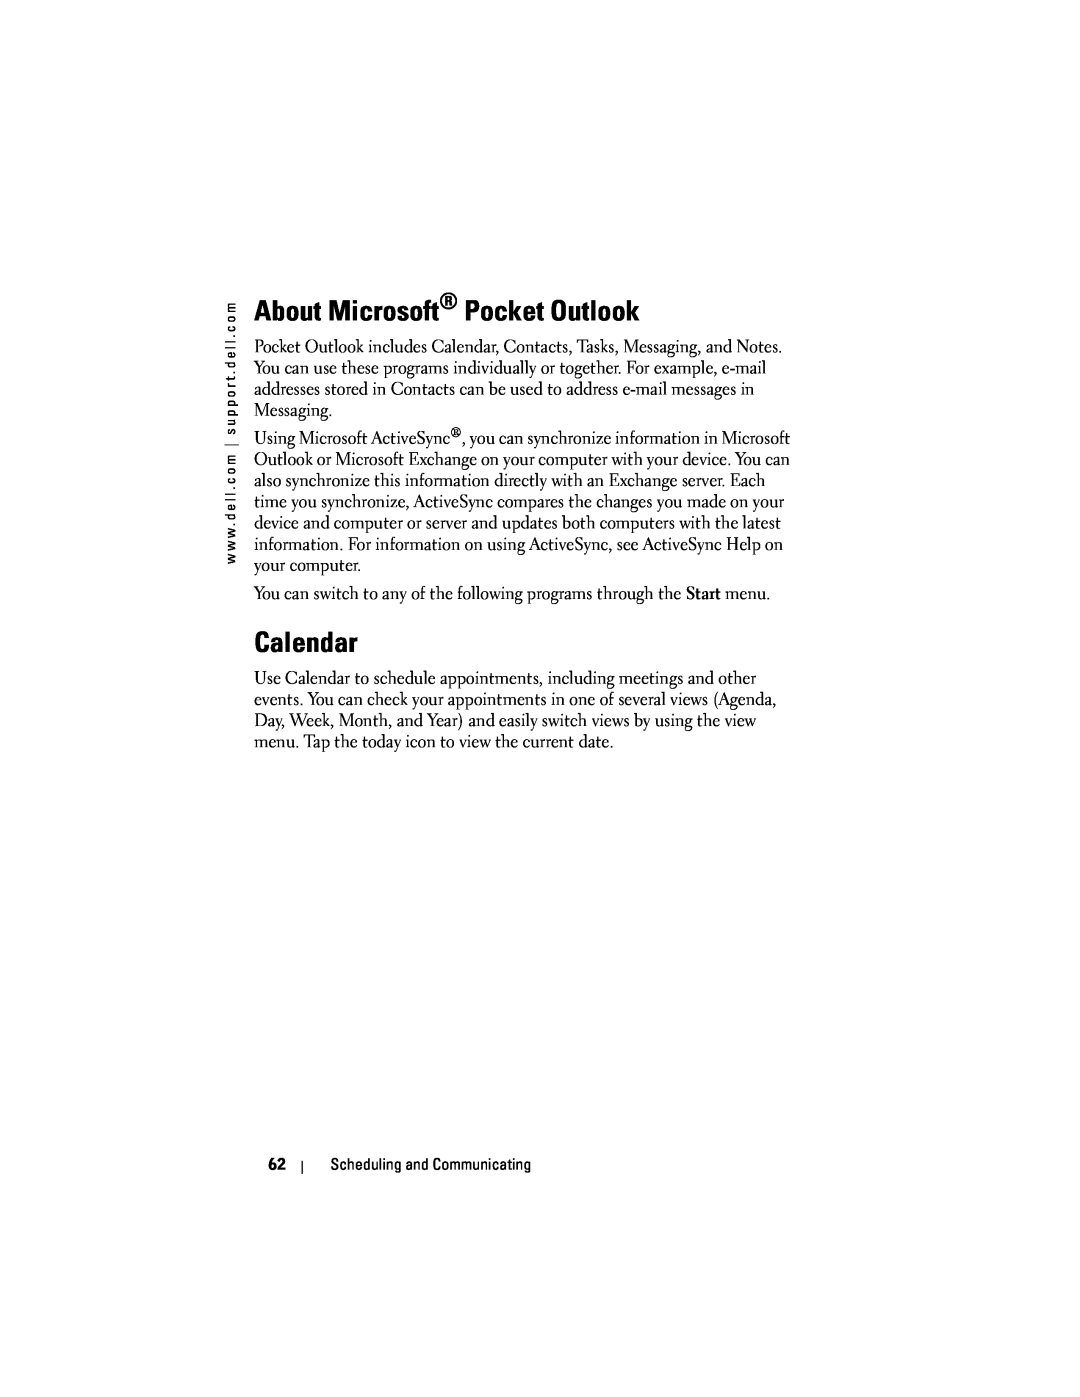 Dell HC02U-C, HC02U-W, HD03U, HC02U-B owner manual About Microsoft Pocket Outlook, Calendar, Scheduling and Communicating 